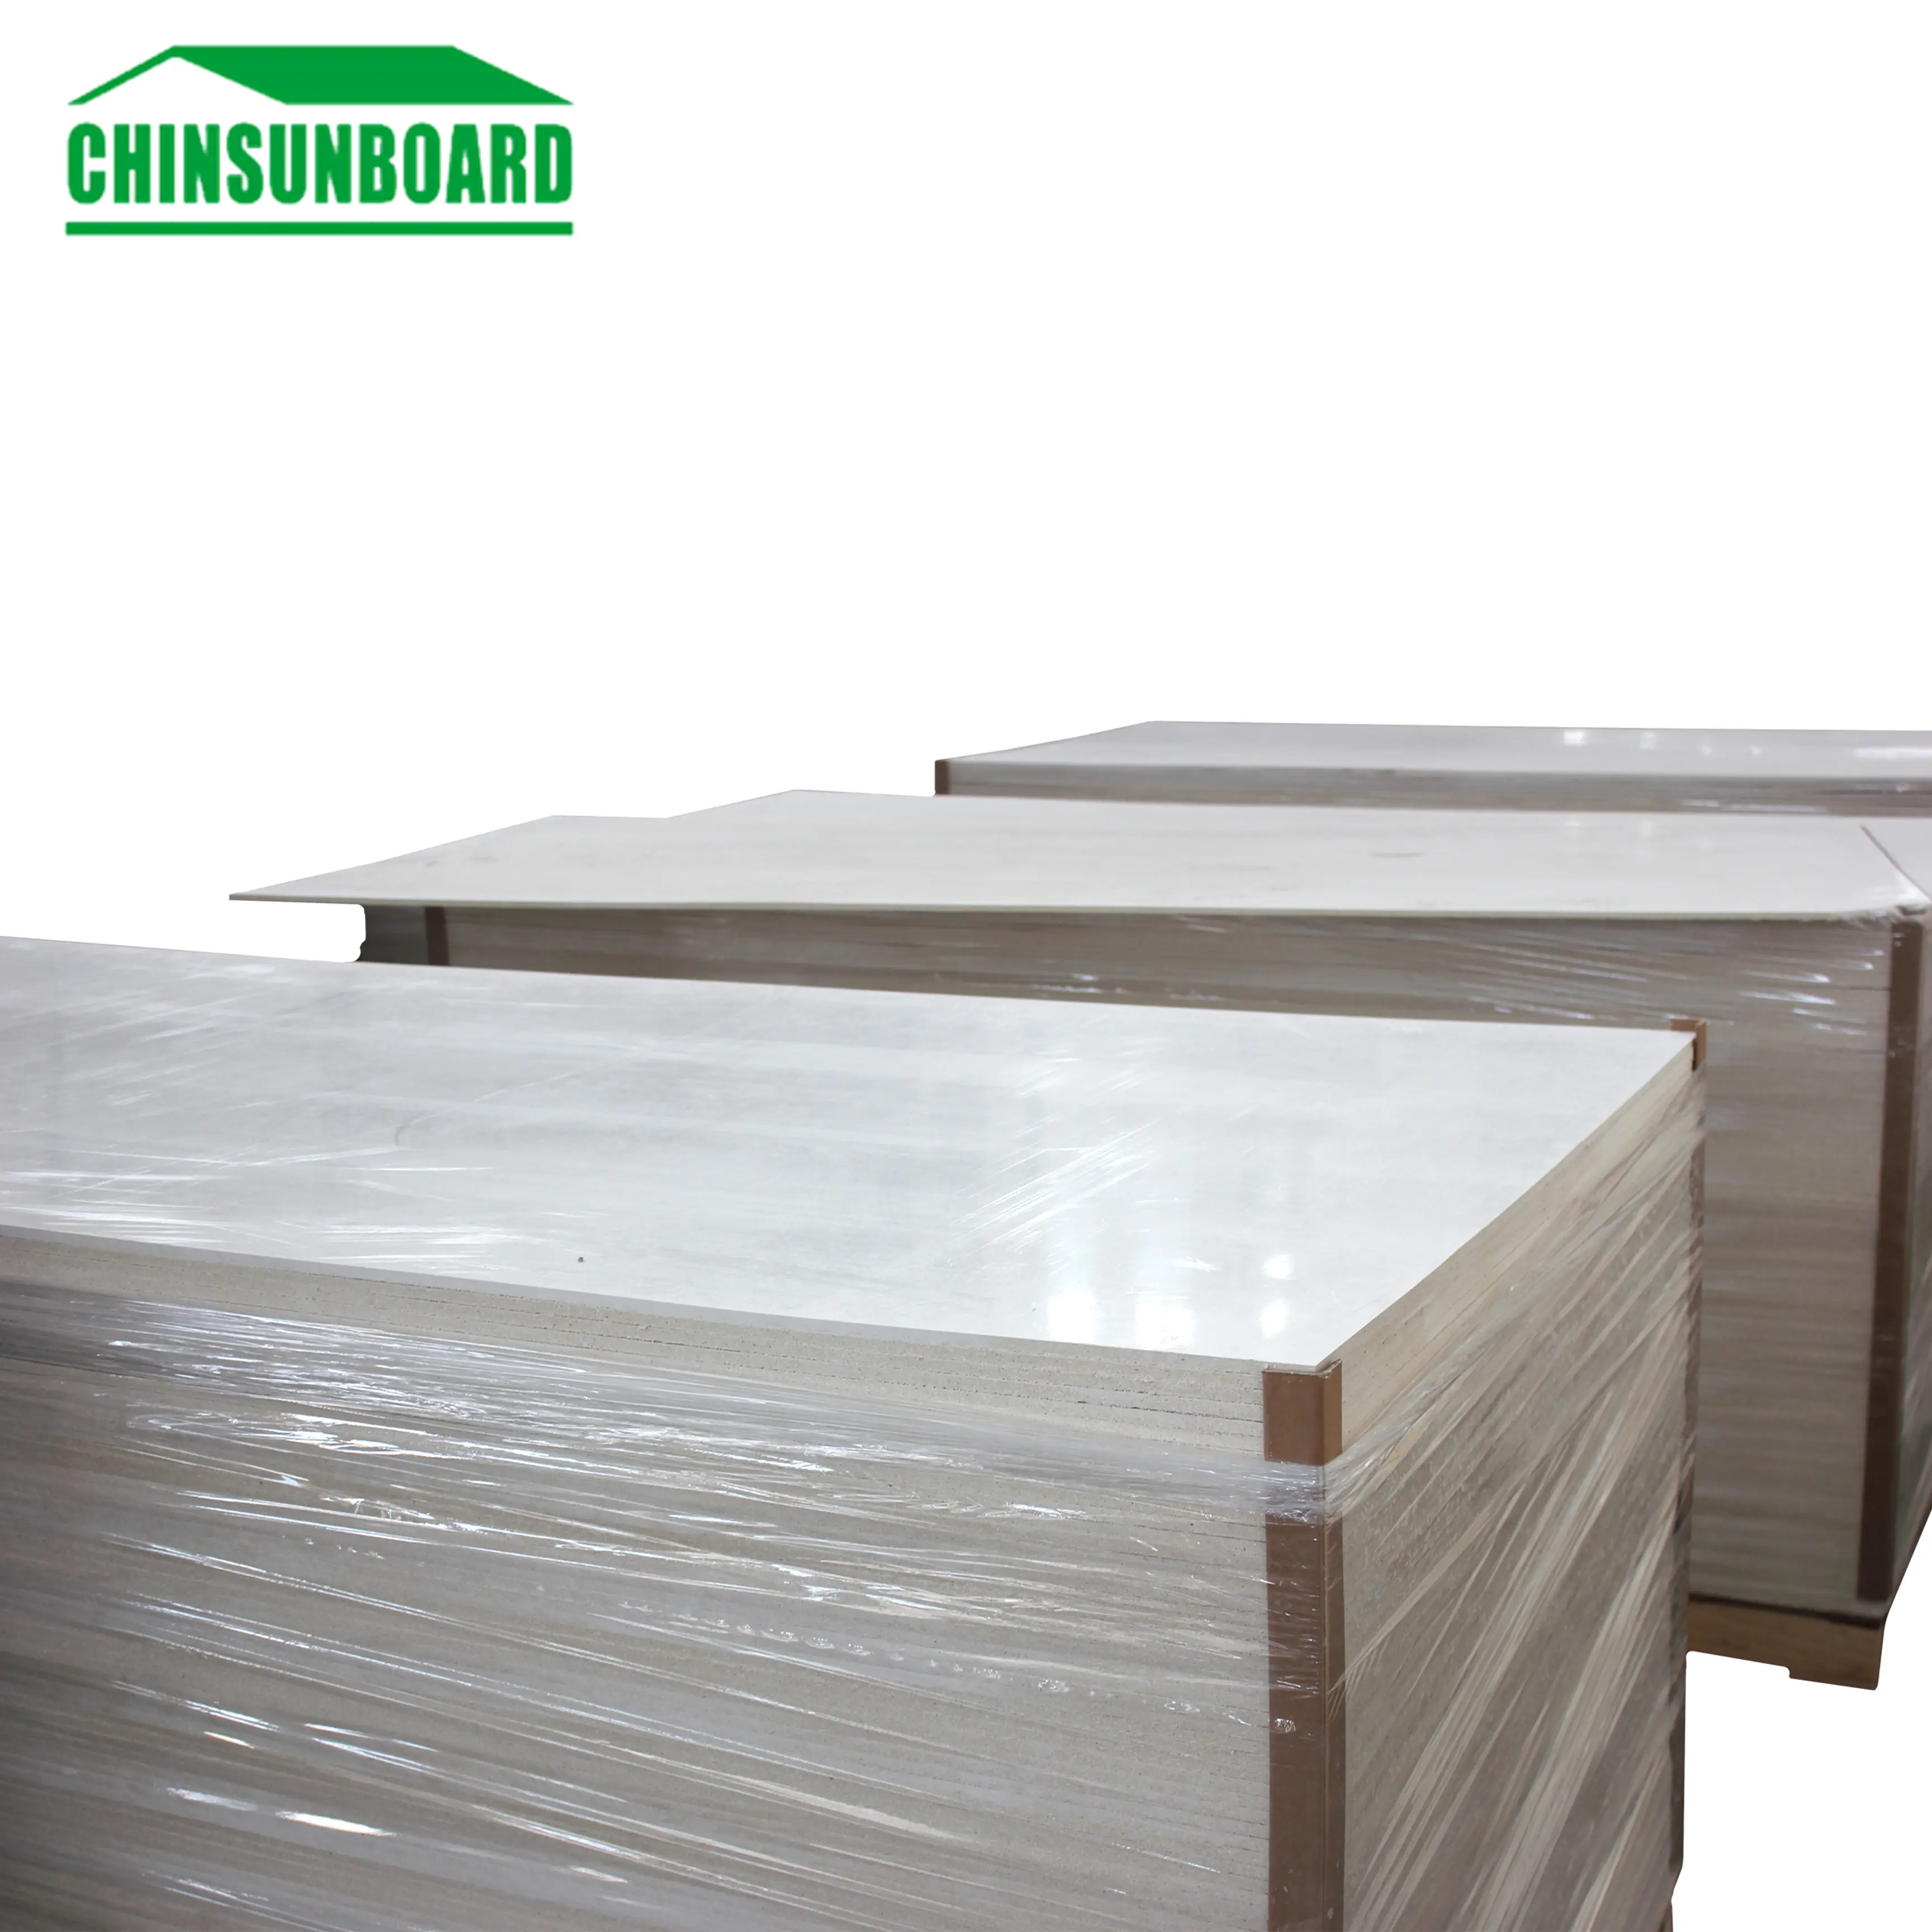 Top Quality Chloride Free Mgo Board Sultate Fireboards/Fireproof Sheet